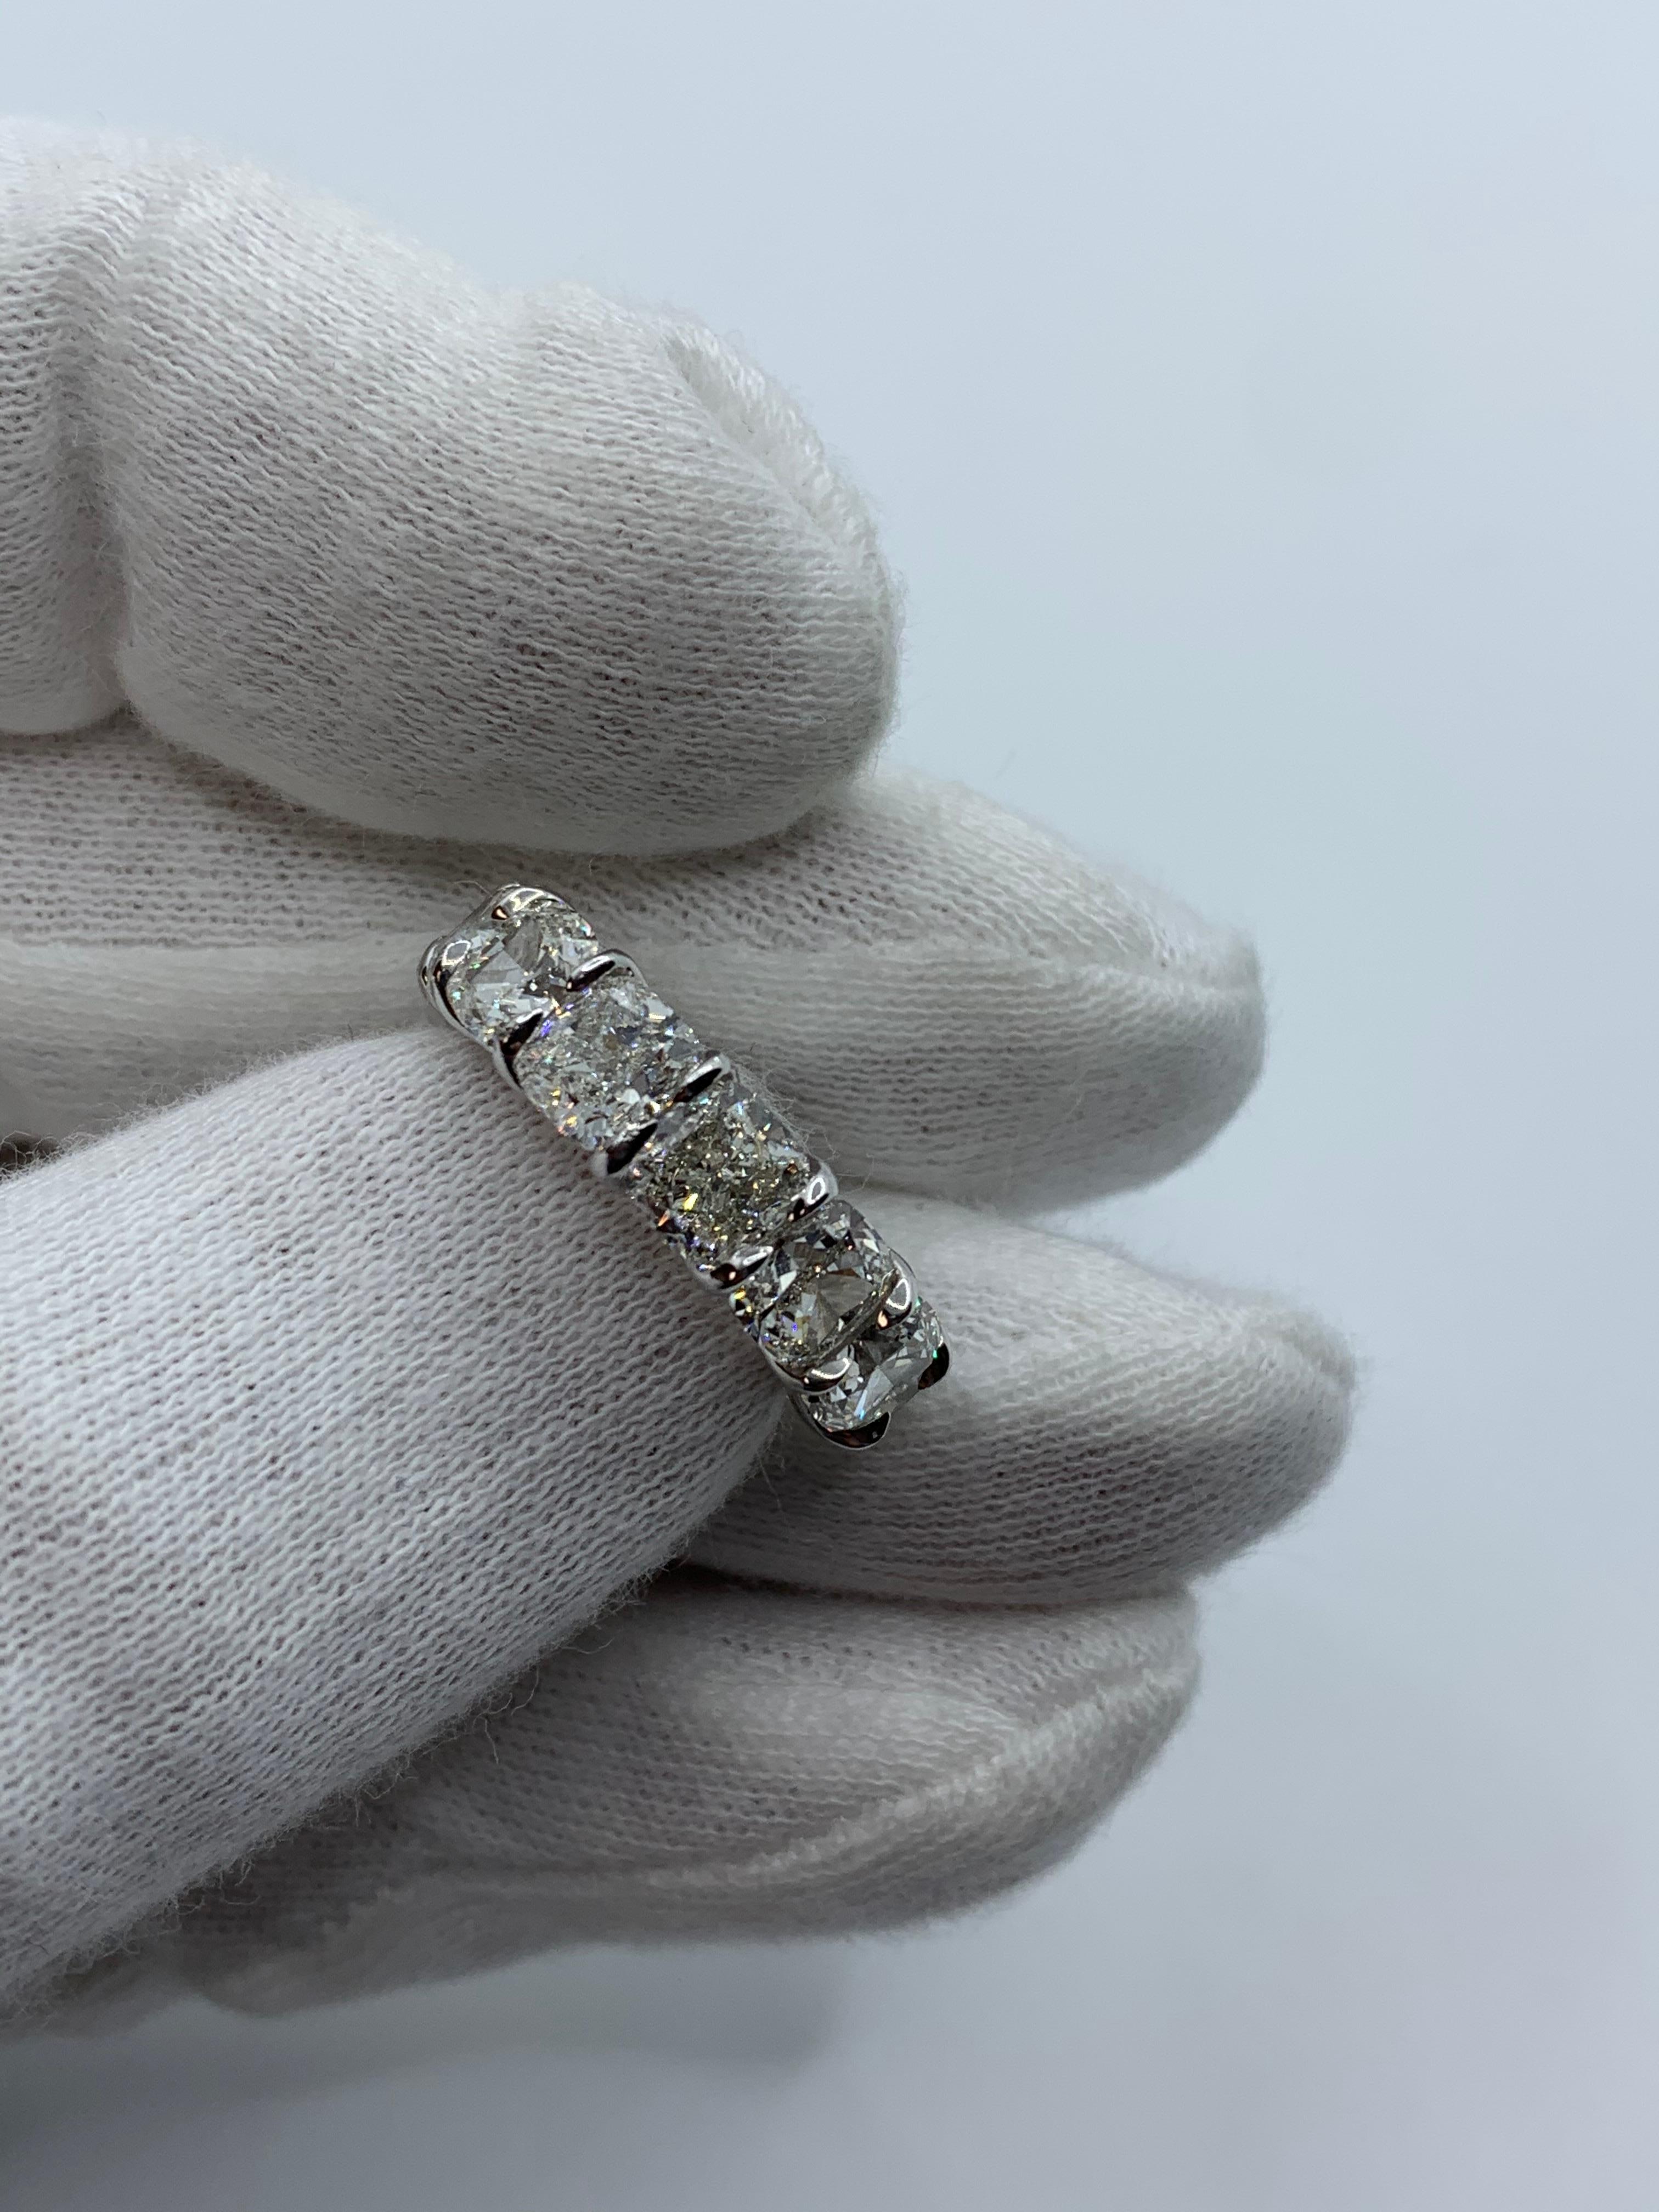 This beautiful Eternity Band is set with 13 perfectly matched Cushion Cut Diamonds, each weighing between  0.90ct to 0.96ct for a total of 11.90 Carats. Each stone is certified by GIA as H-I color and VVS-VS clarity. Made in New York City using